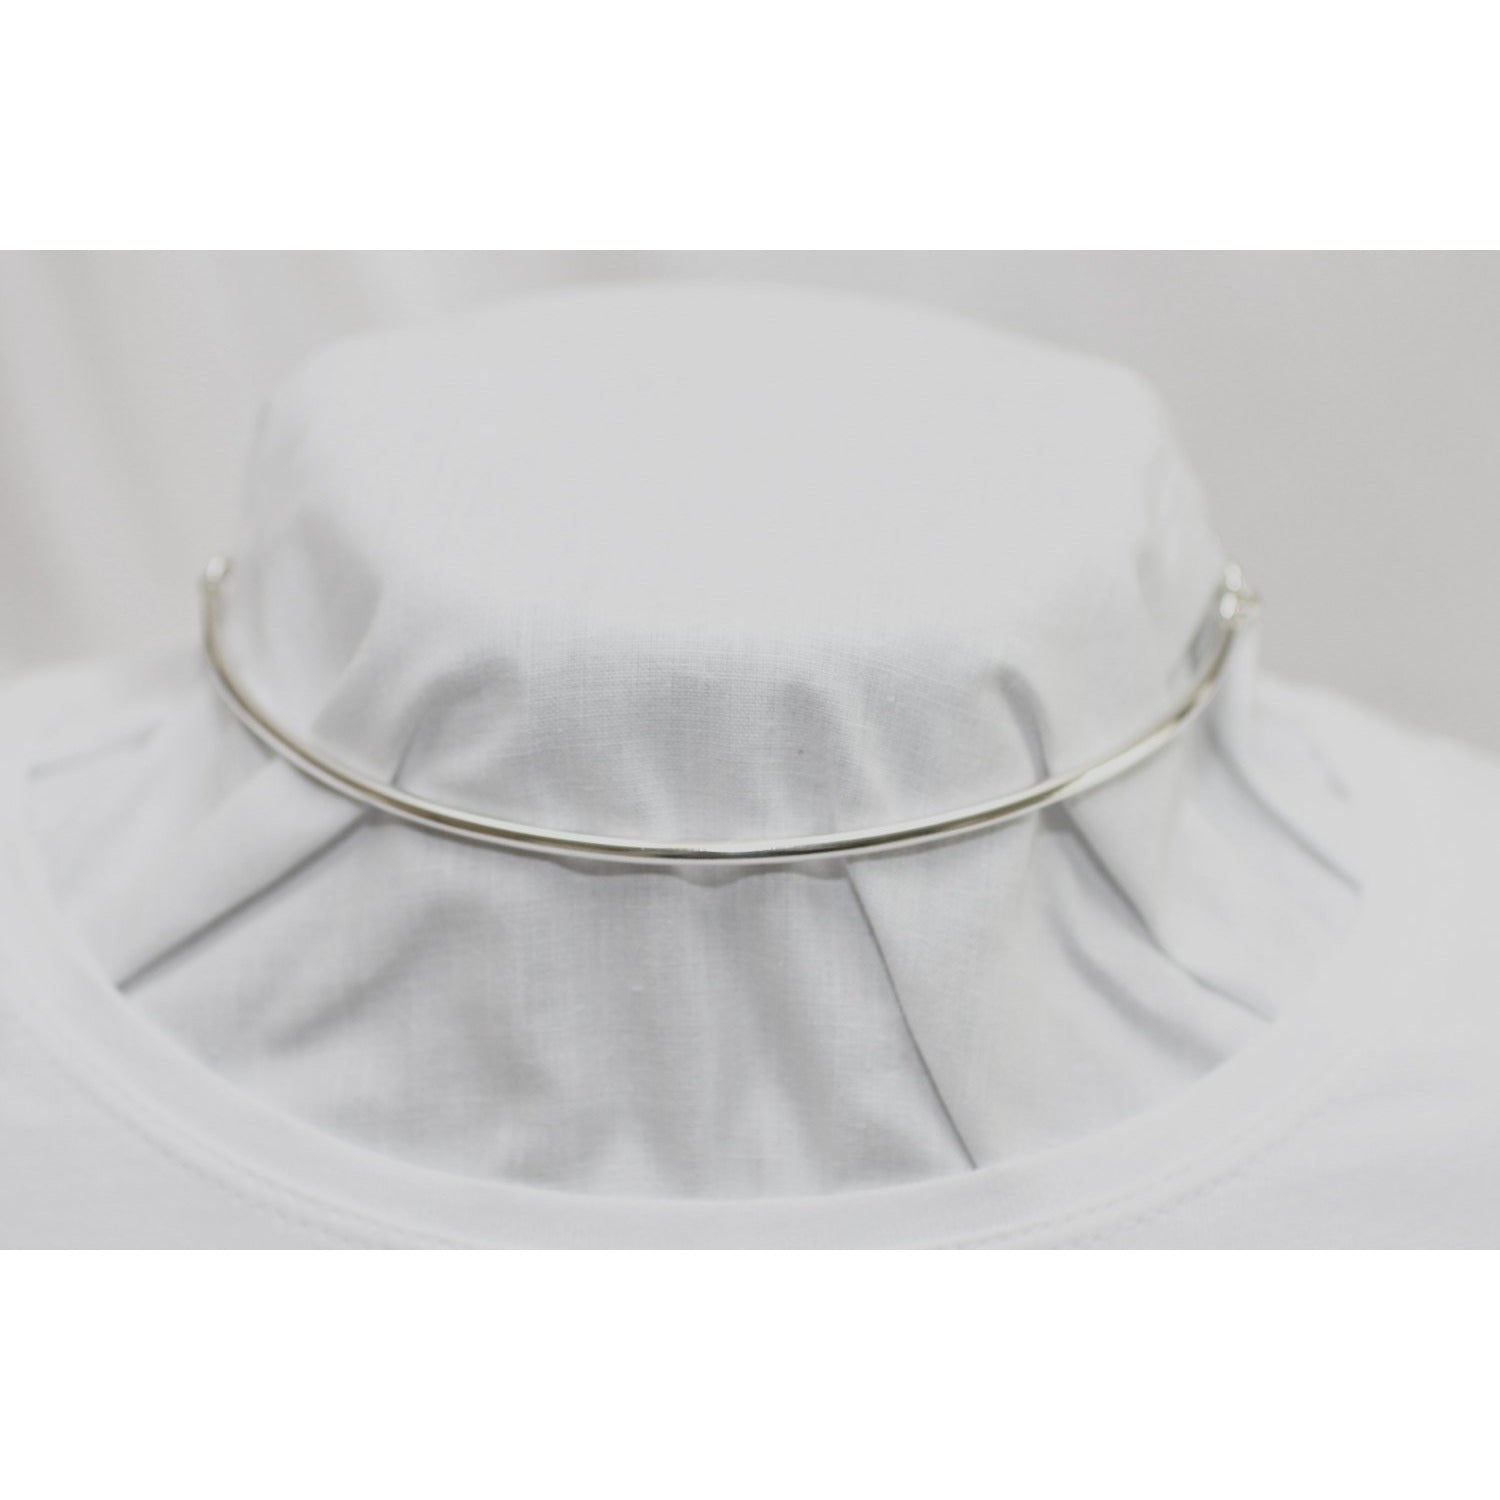 Discreet Day Collar, Removable Sterling O ring, 3mm Sterling Silver (8g), Chain Back Section, Handmade, BDSM Collar